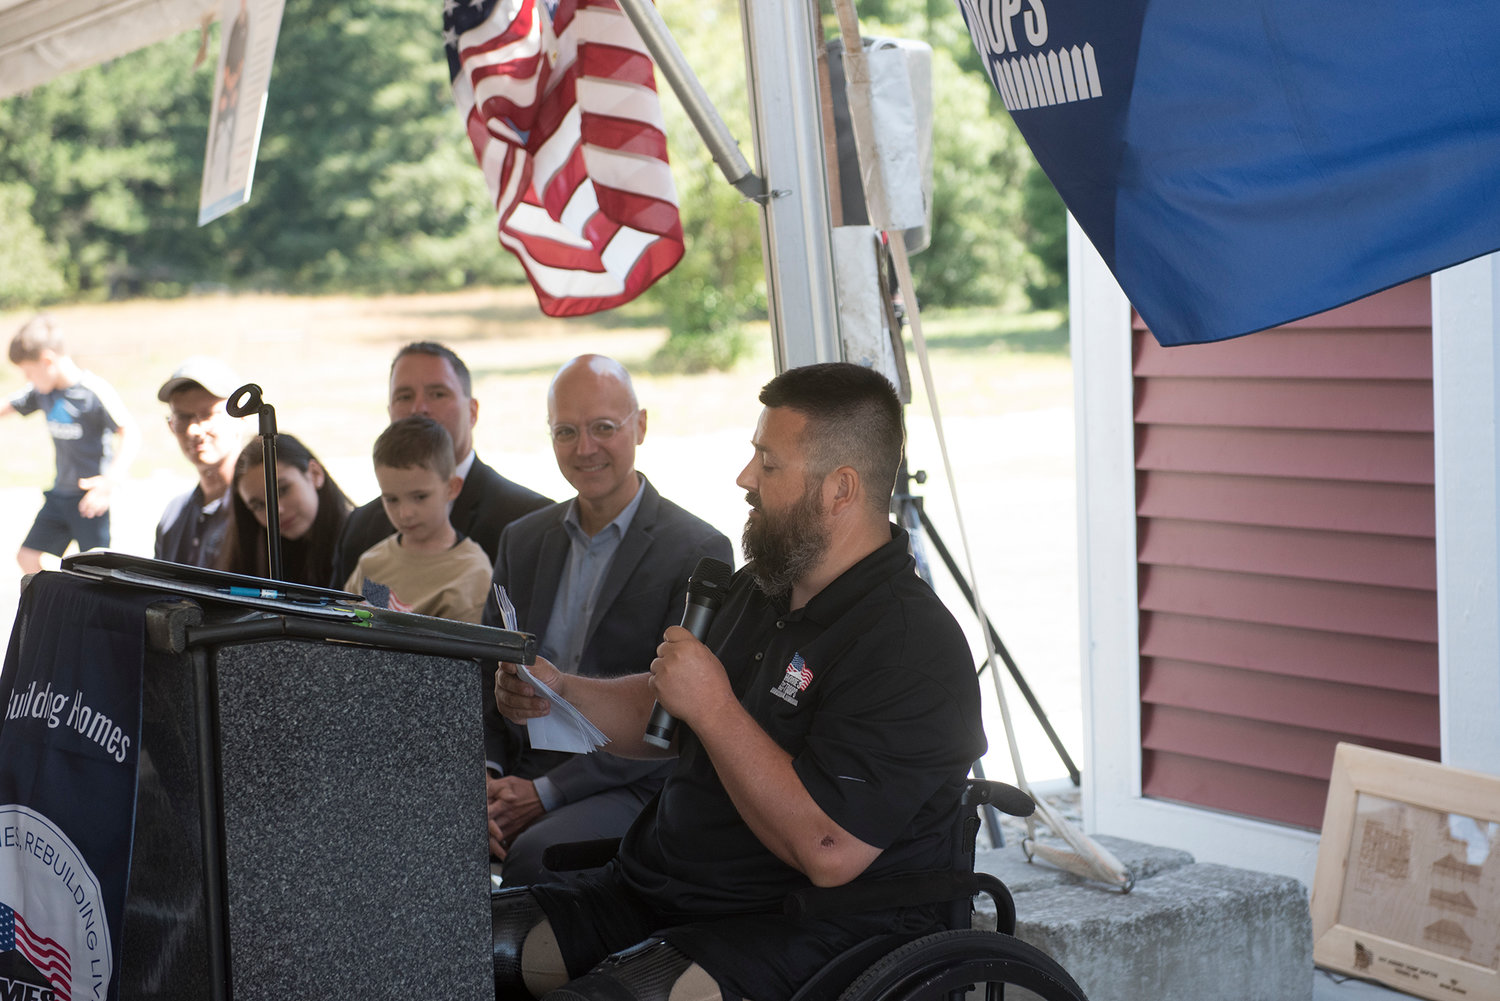 U.S. Army Sgt. Jereme Sawyer addresses a crowd in front of his new home in Tenino on Saturday, July 20, 2019.